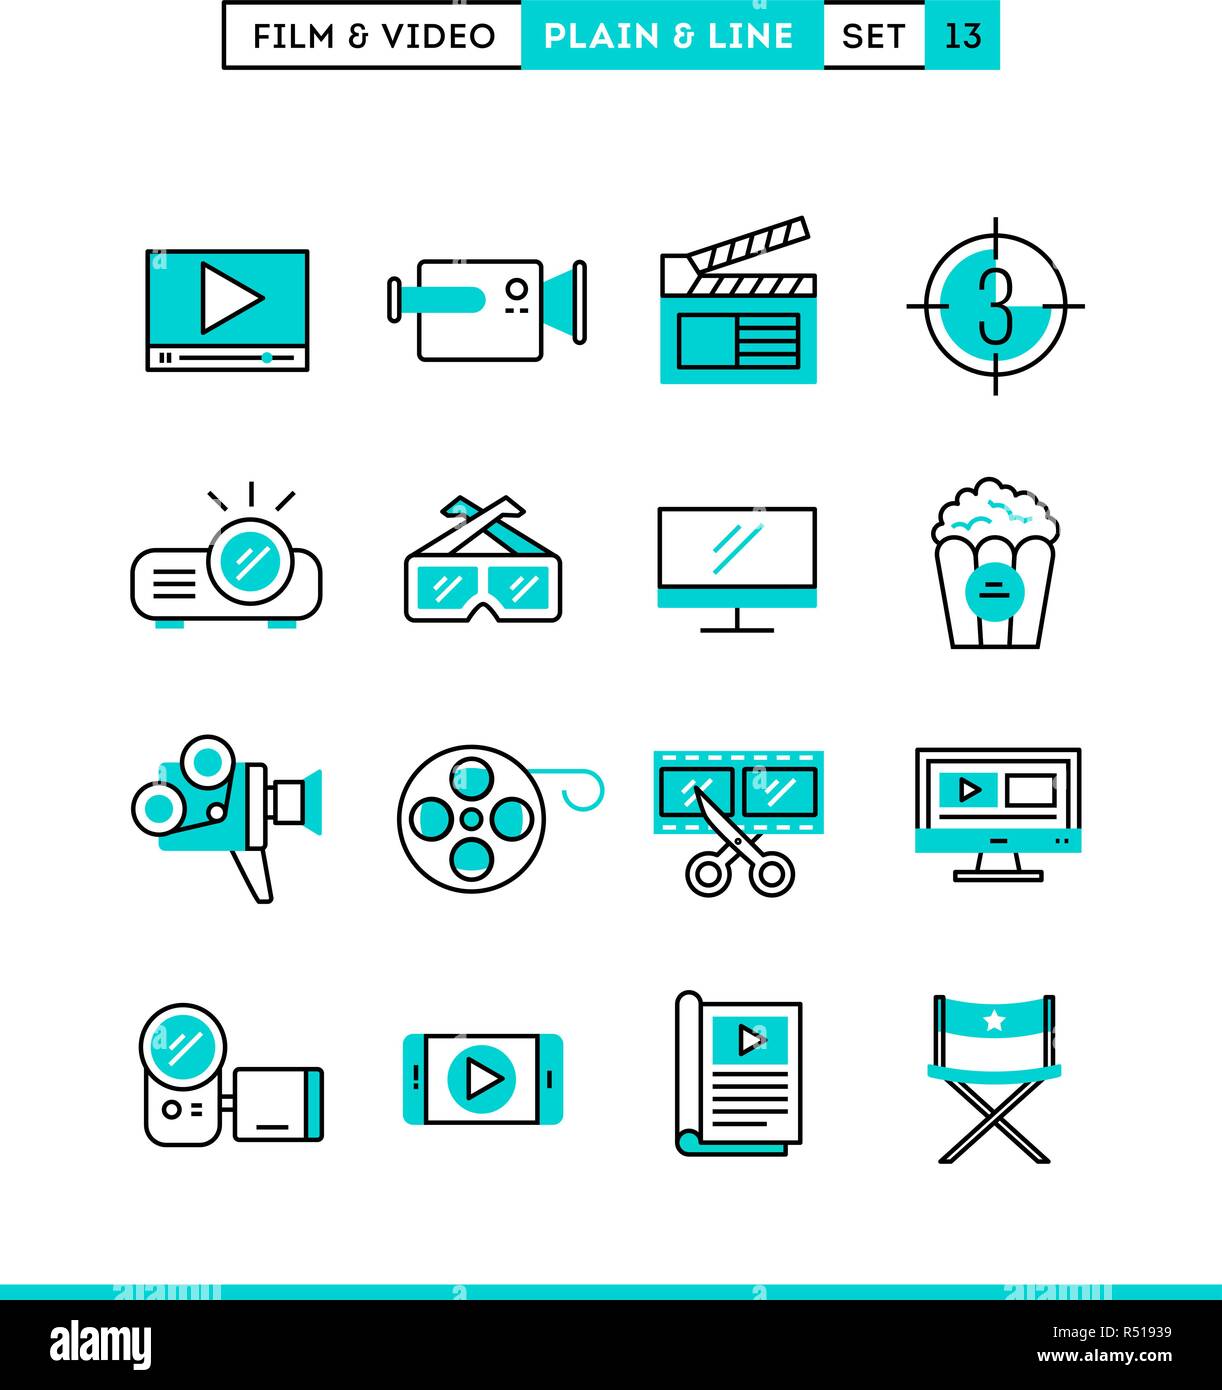 Film, video, shooting, editing and more. Plain and line icons set, flat design Stock Vector